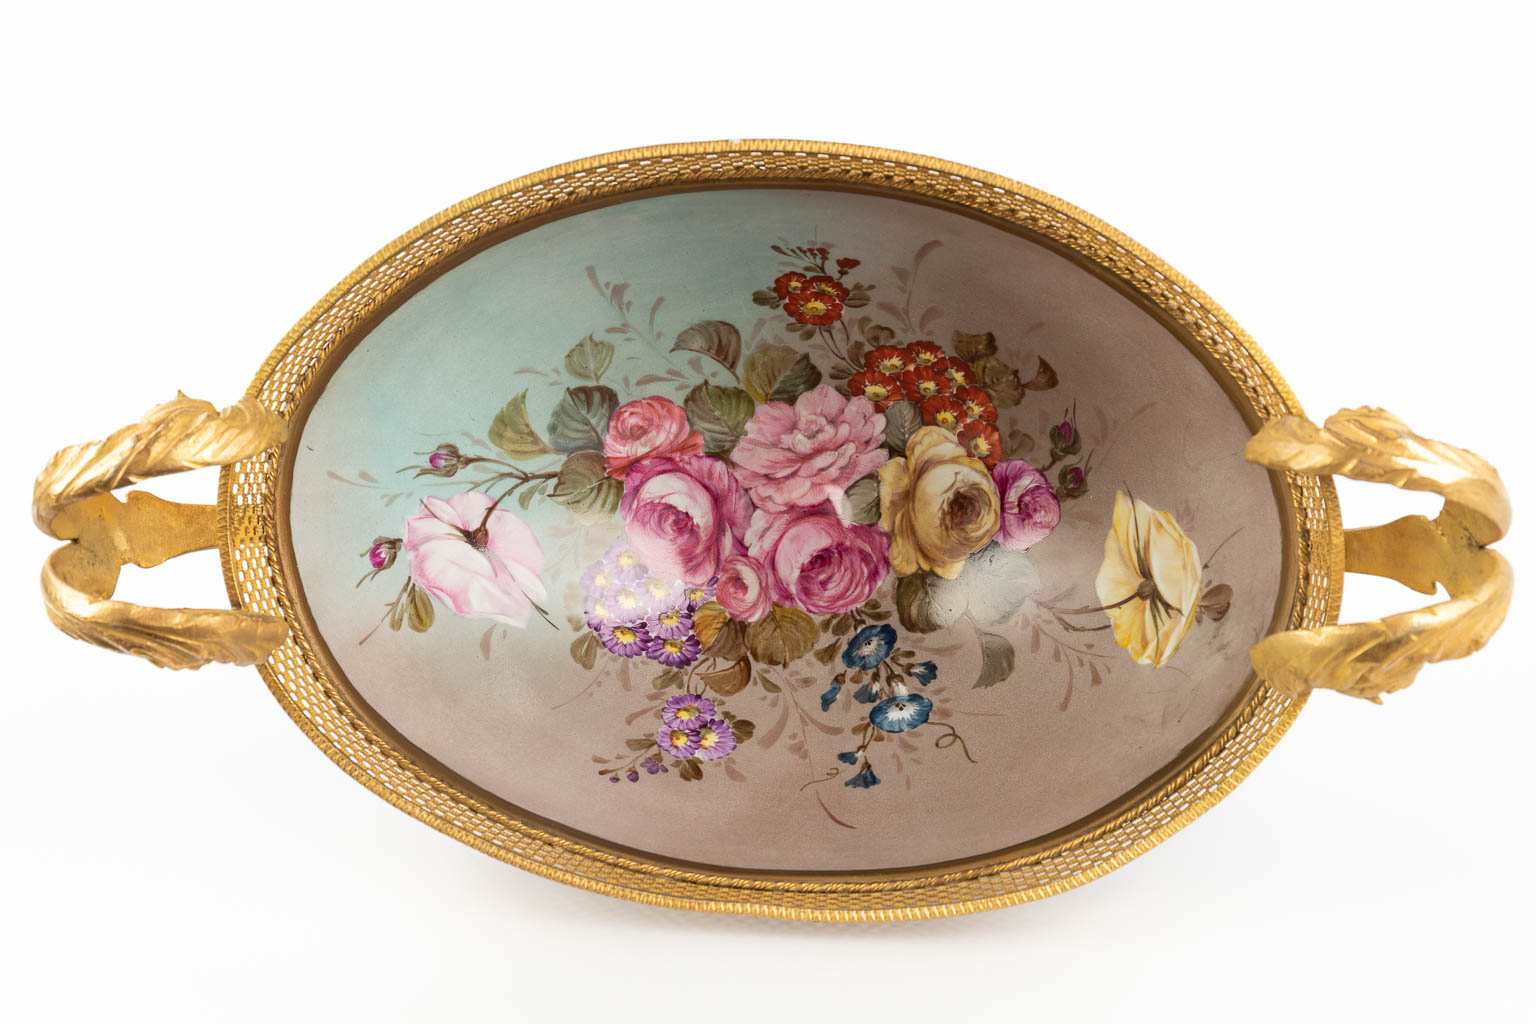 Sèvres, a bowl on a stand, mounted with bronze and hand-painted flower decor. 20th C. (D:24 x W:44 x H:38 cm)